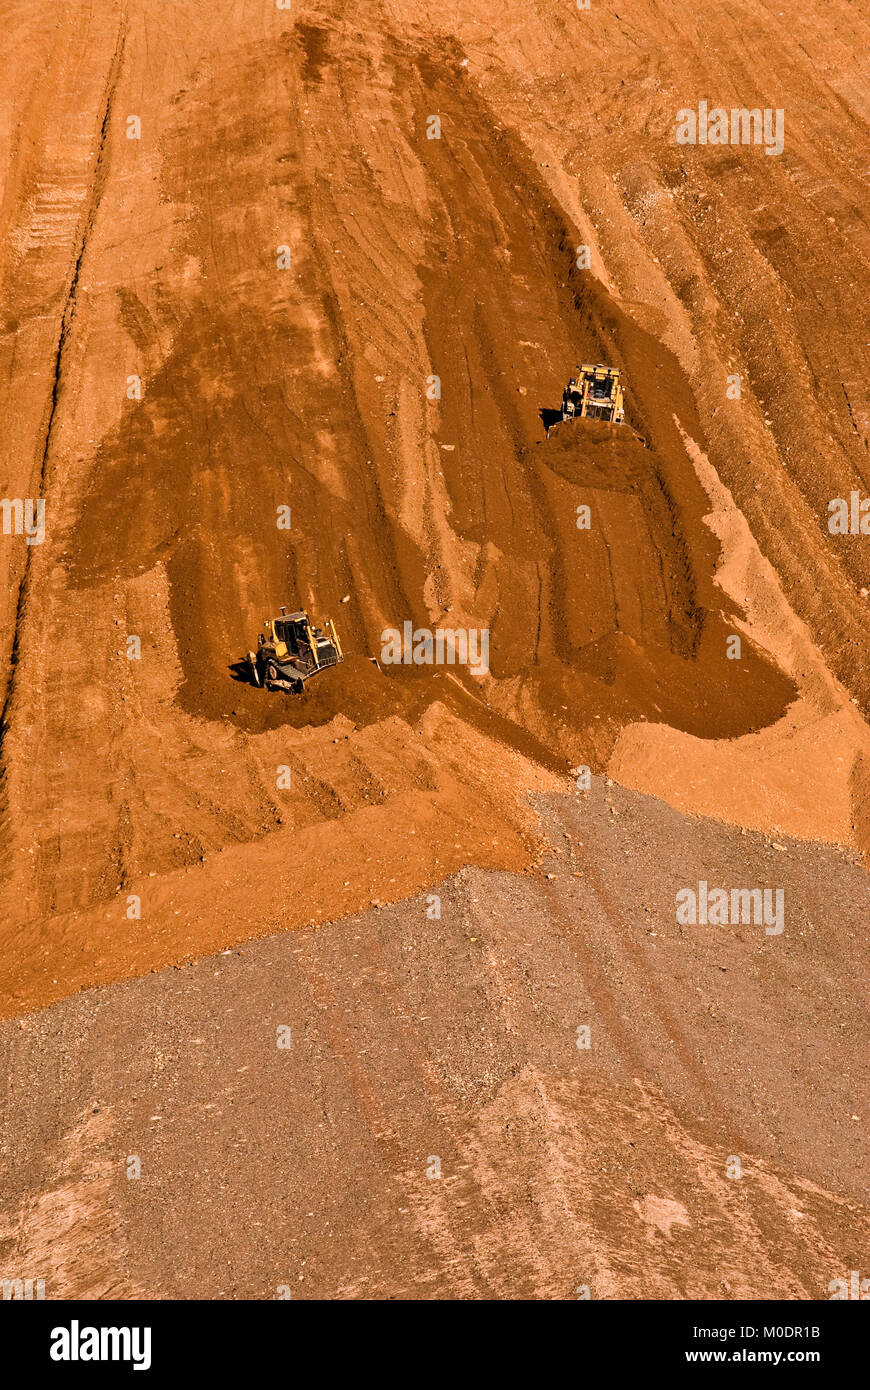 Reclamation work on stockpiles of mining waste at Freeport-McMoRan Copper & Gold Inc. Tyrone Mine near Silver City, New Mexico, USA Stock Photo